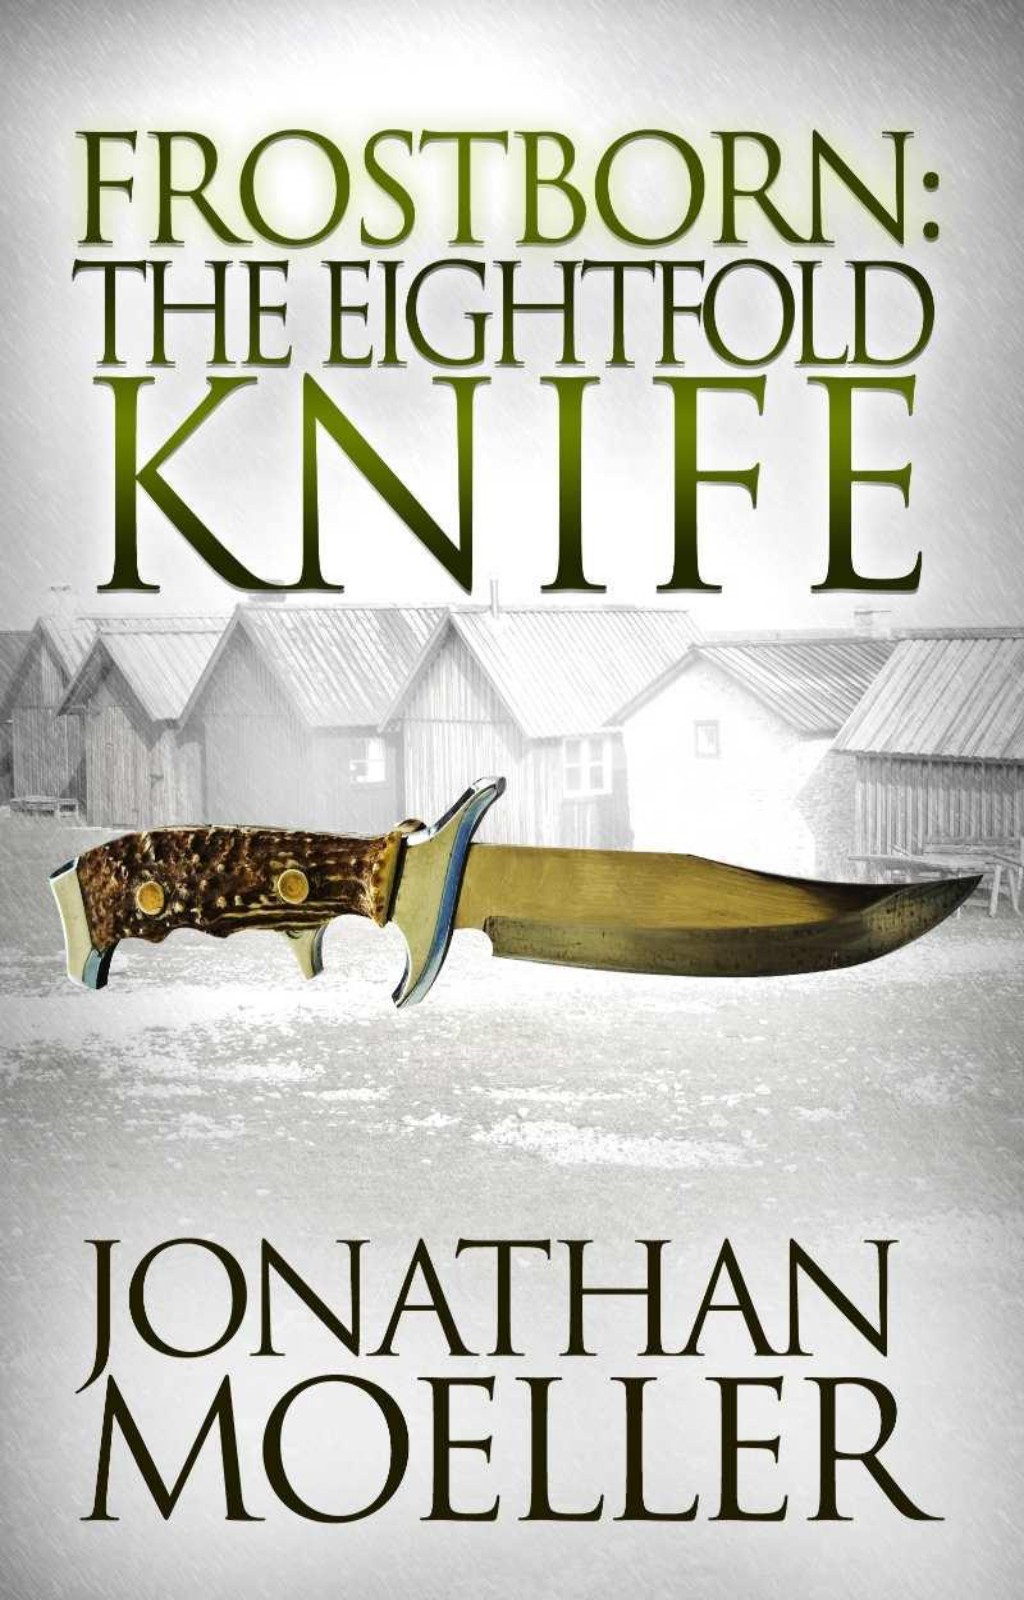 Frostborn: The Eightfold Knife by Jonathan Moeller